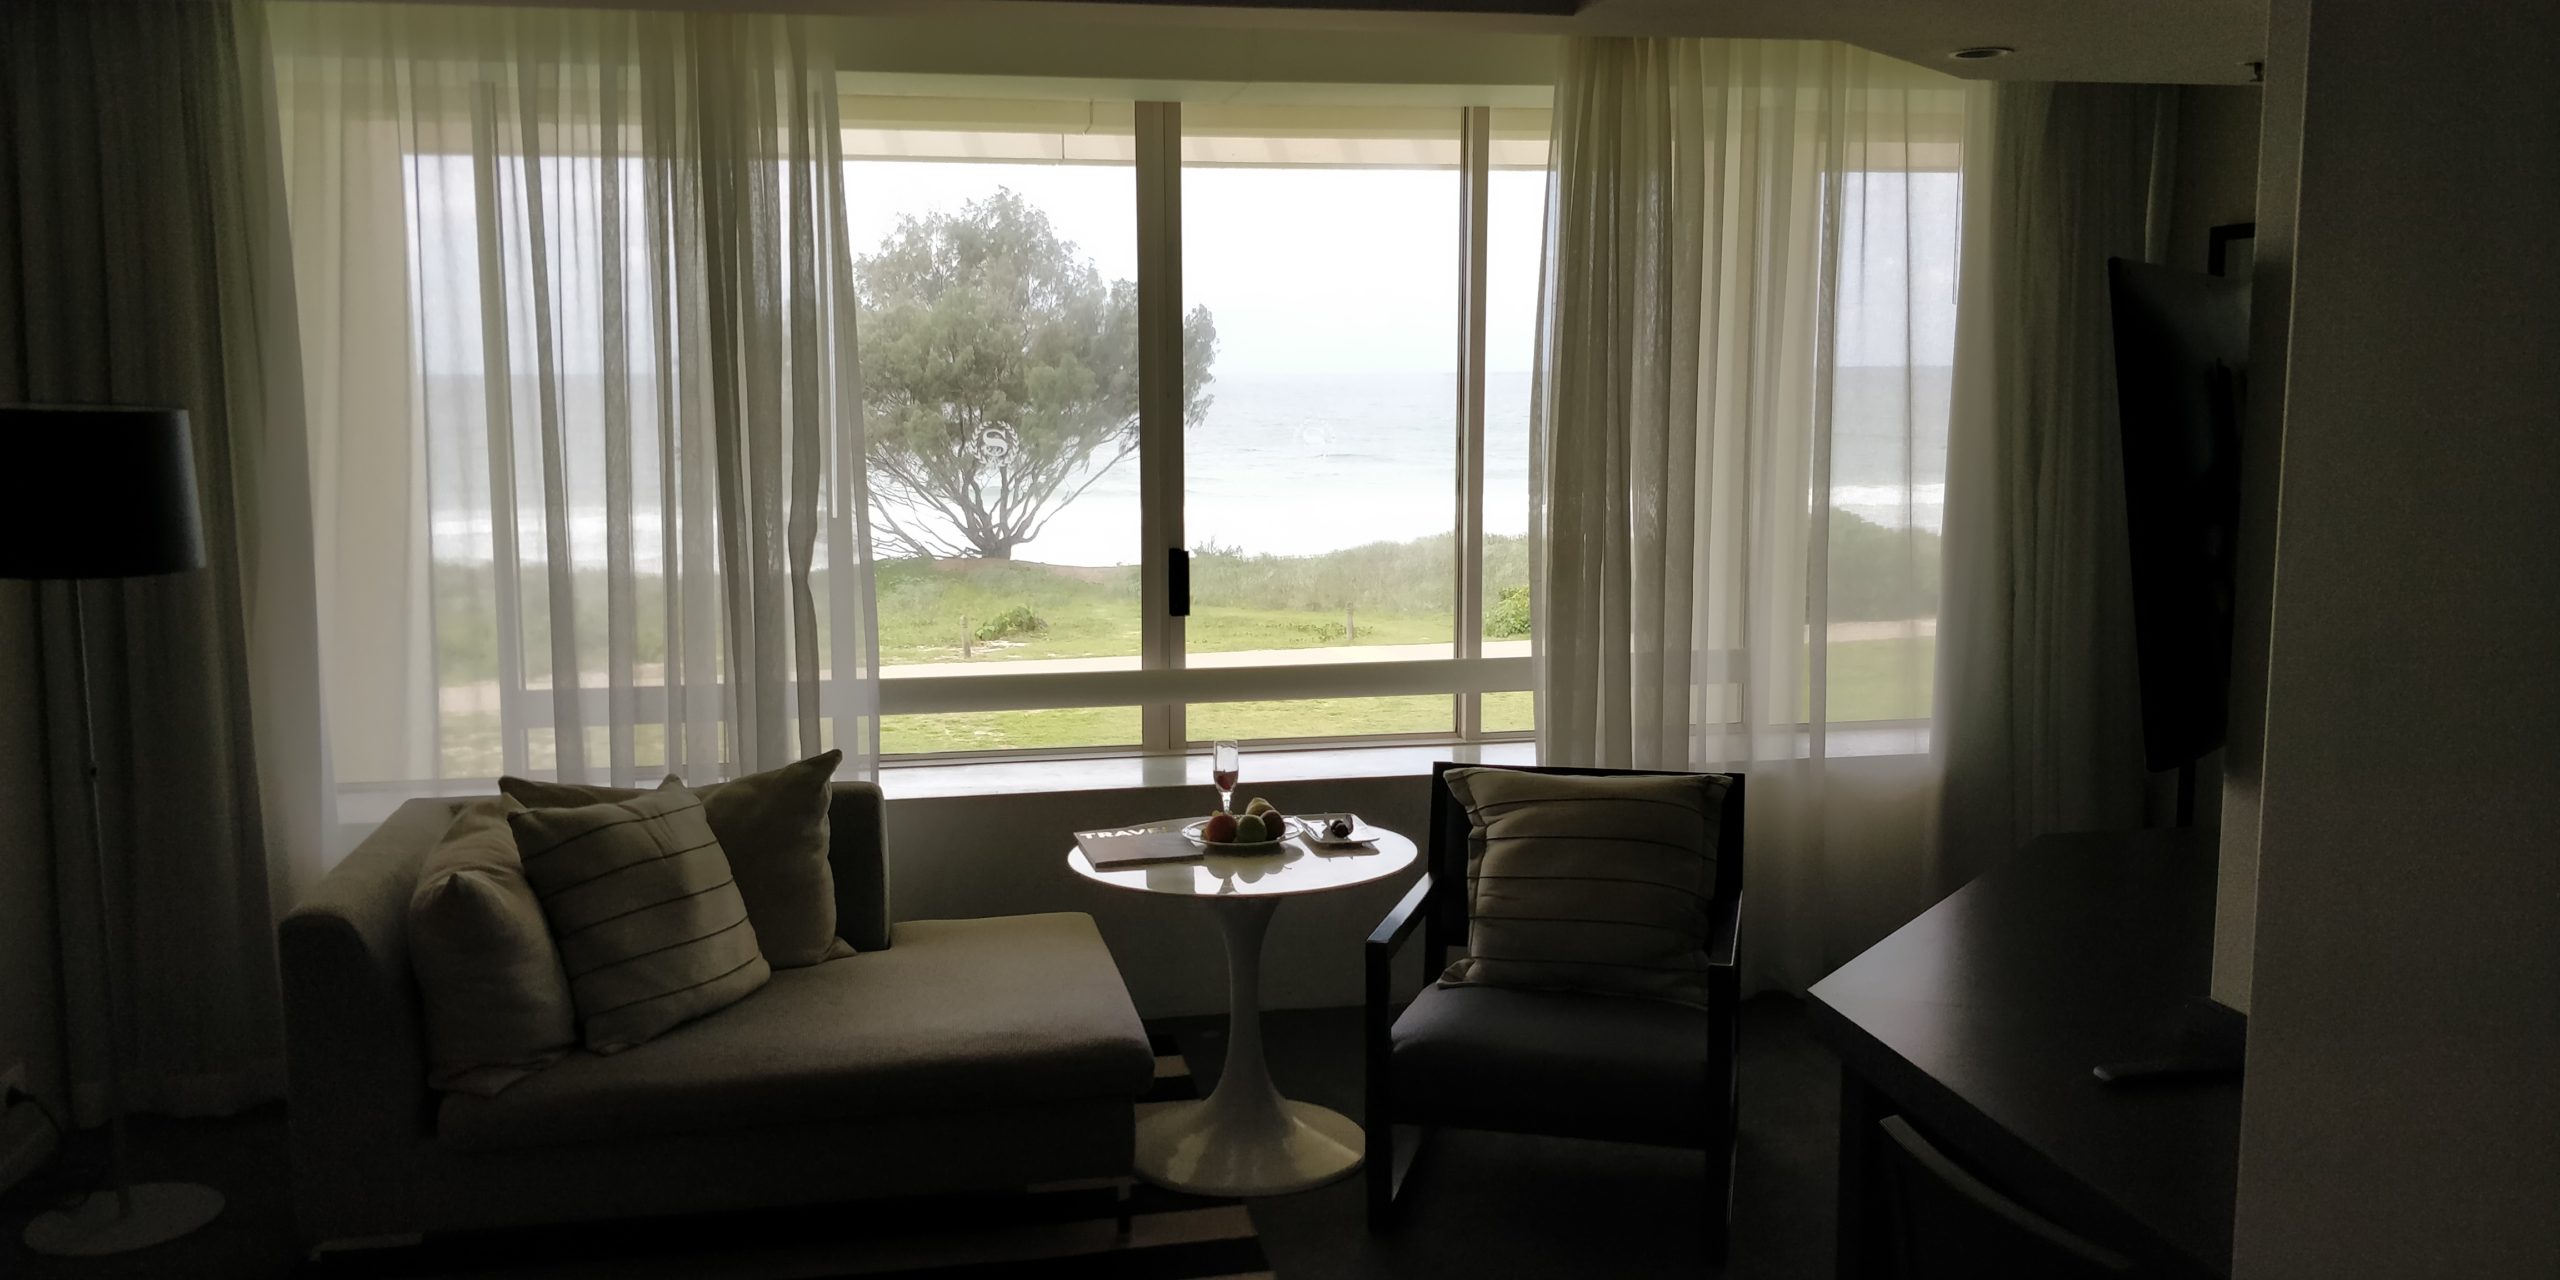 Review the Grand Mirage Resort picture of the seating and wide widow which opens to the ocean view